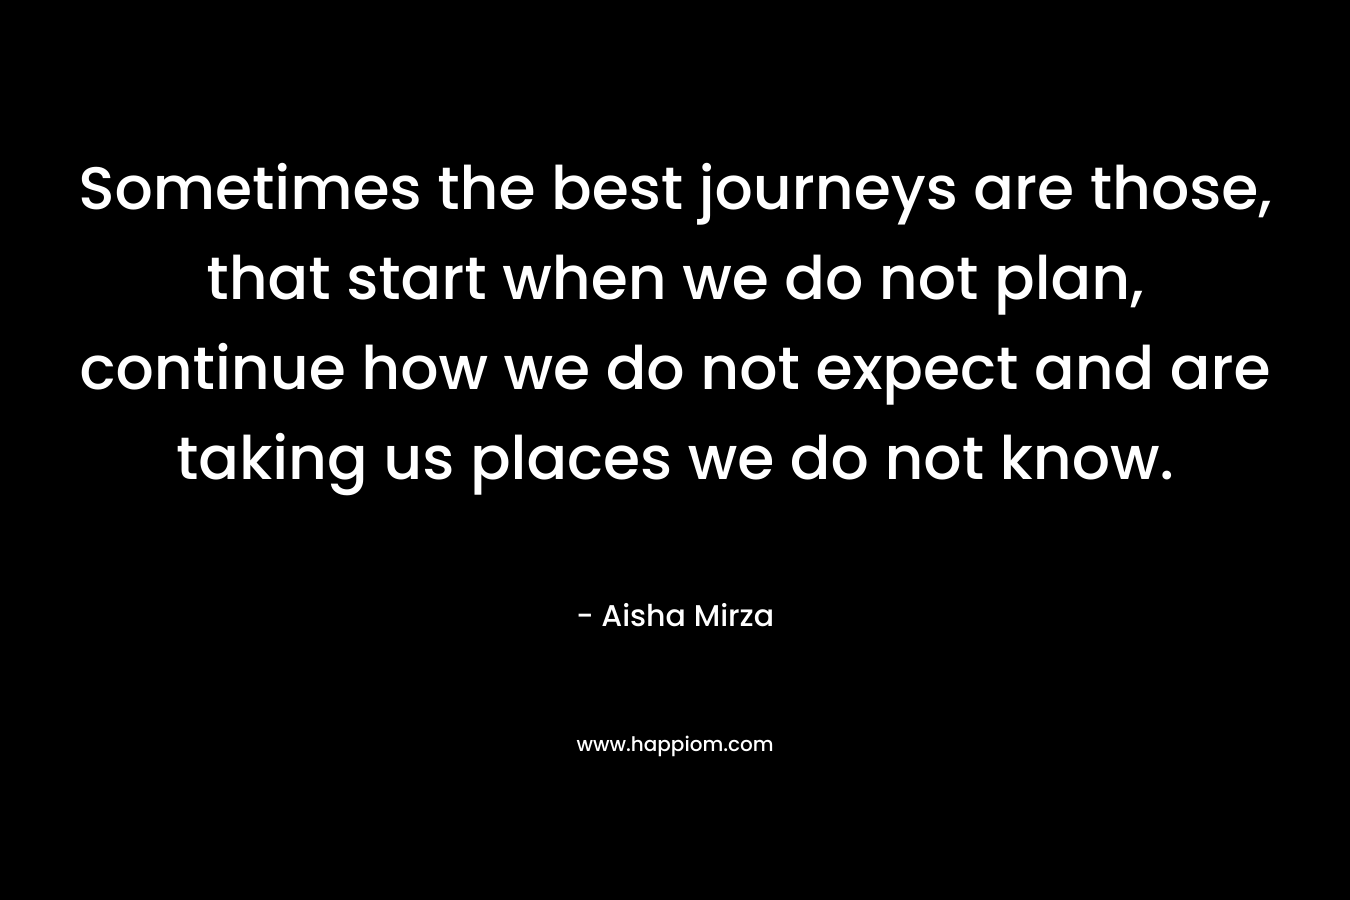 Sometimes the best journeys are those, that start when we do not plan, continue how we do not expect and are taking us places we do not know.